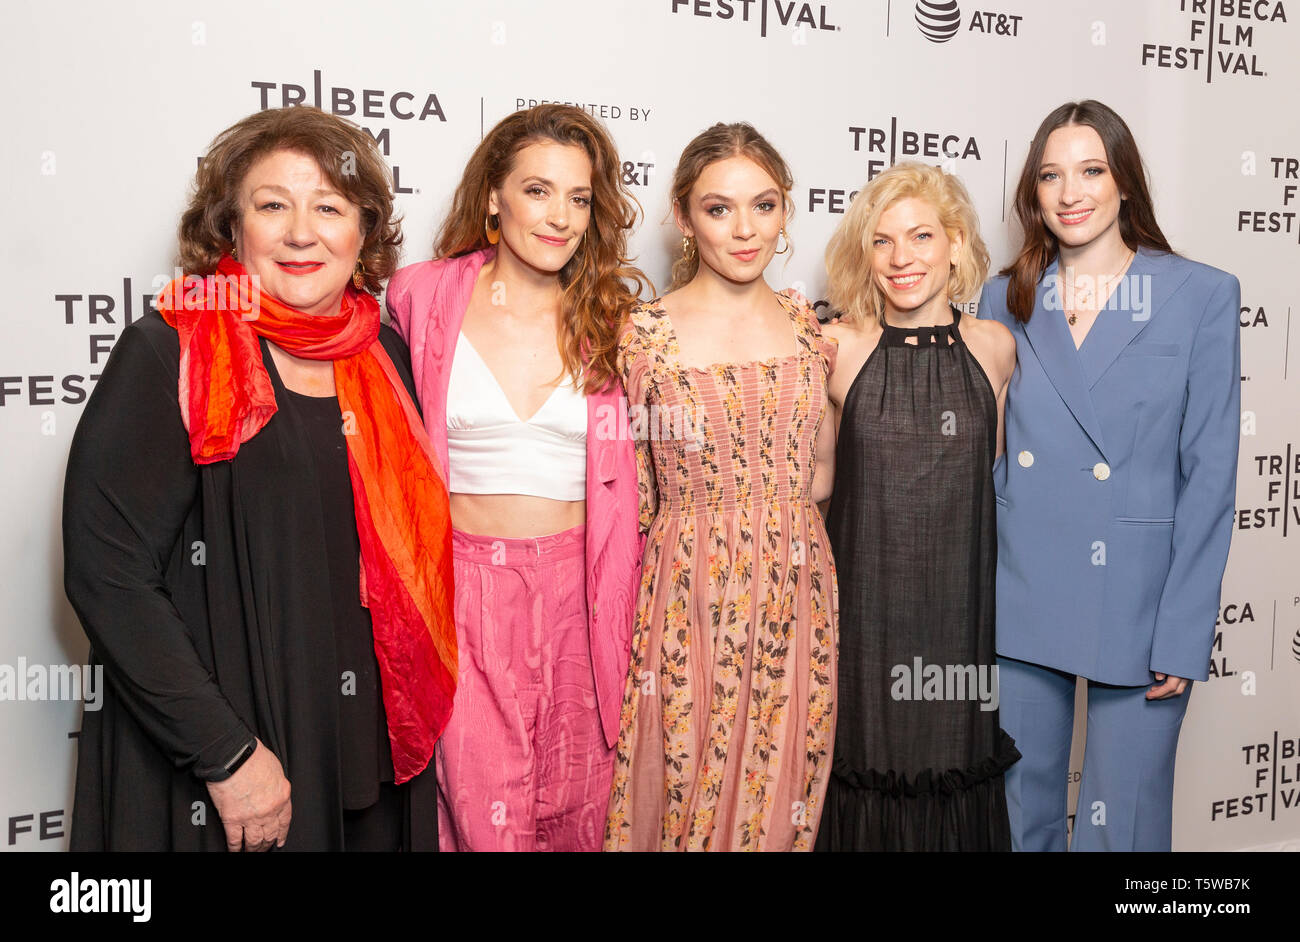 New York, NY - April 26, 2019: Margo Martindale, Danielle Krudy, Morgan Saylor, Bridget Savage Cole, Sophie Lowe attend the Blow The Man Down screening at Tribeca Film Festival at SVA Theatre Stock Photo